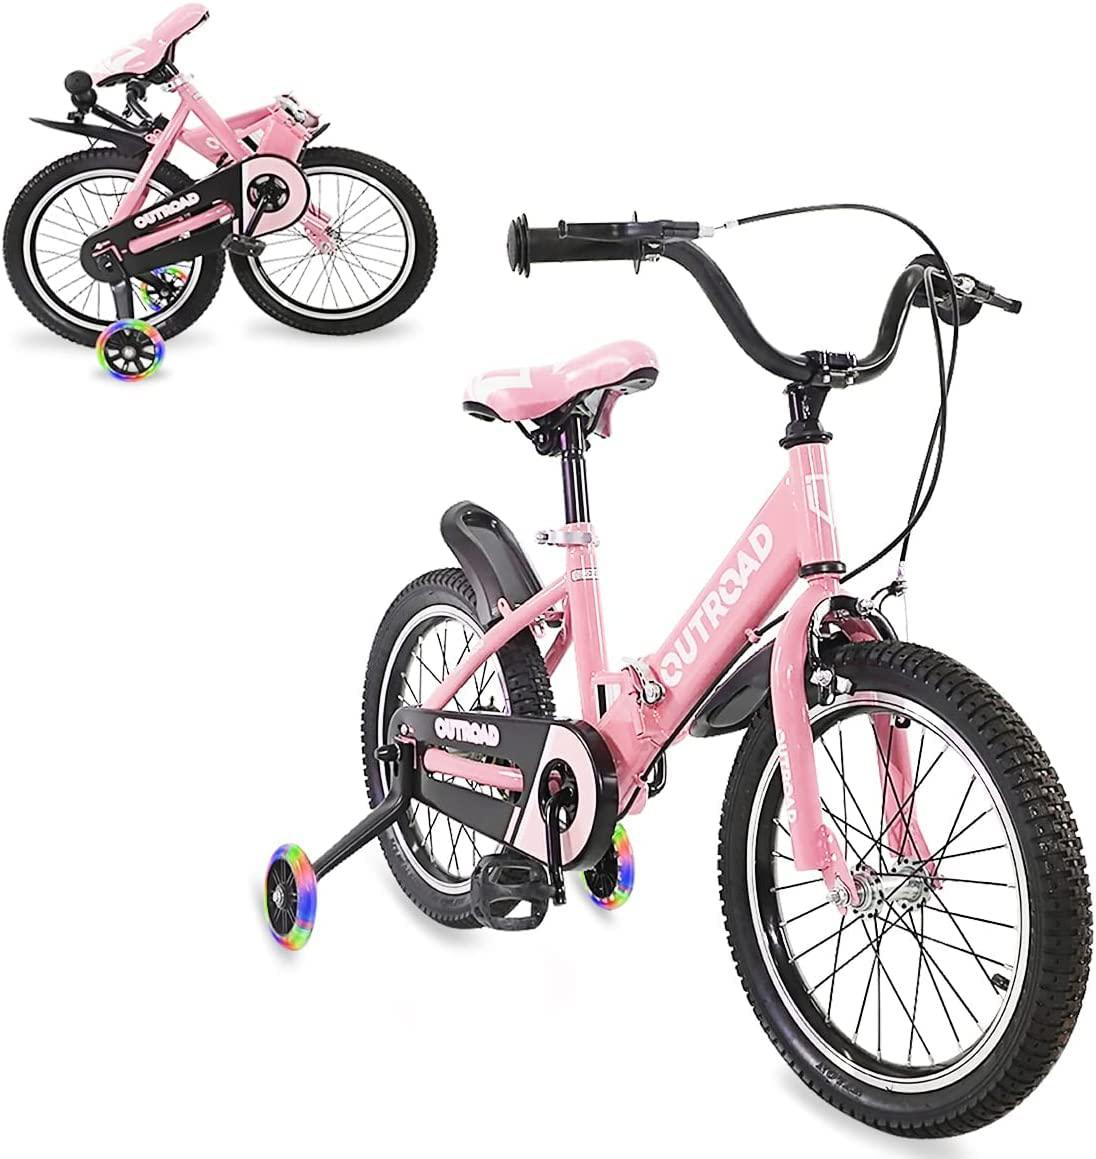 OUTROAD OUTDOOR CAMPING GARDEN PATIO outroad kid's bike 14 inch wheels, adjustable seat, for ages 3-5 years and up toddlers and kids, pink